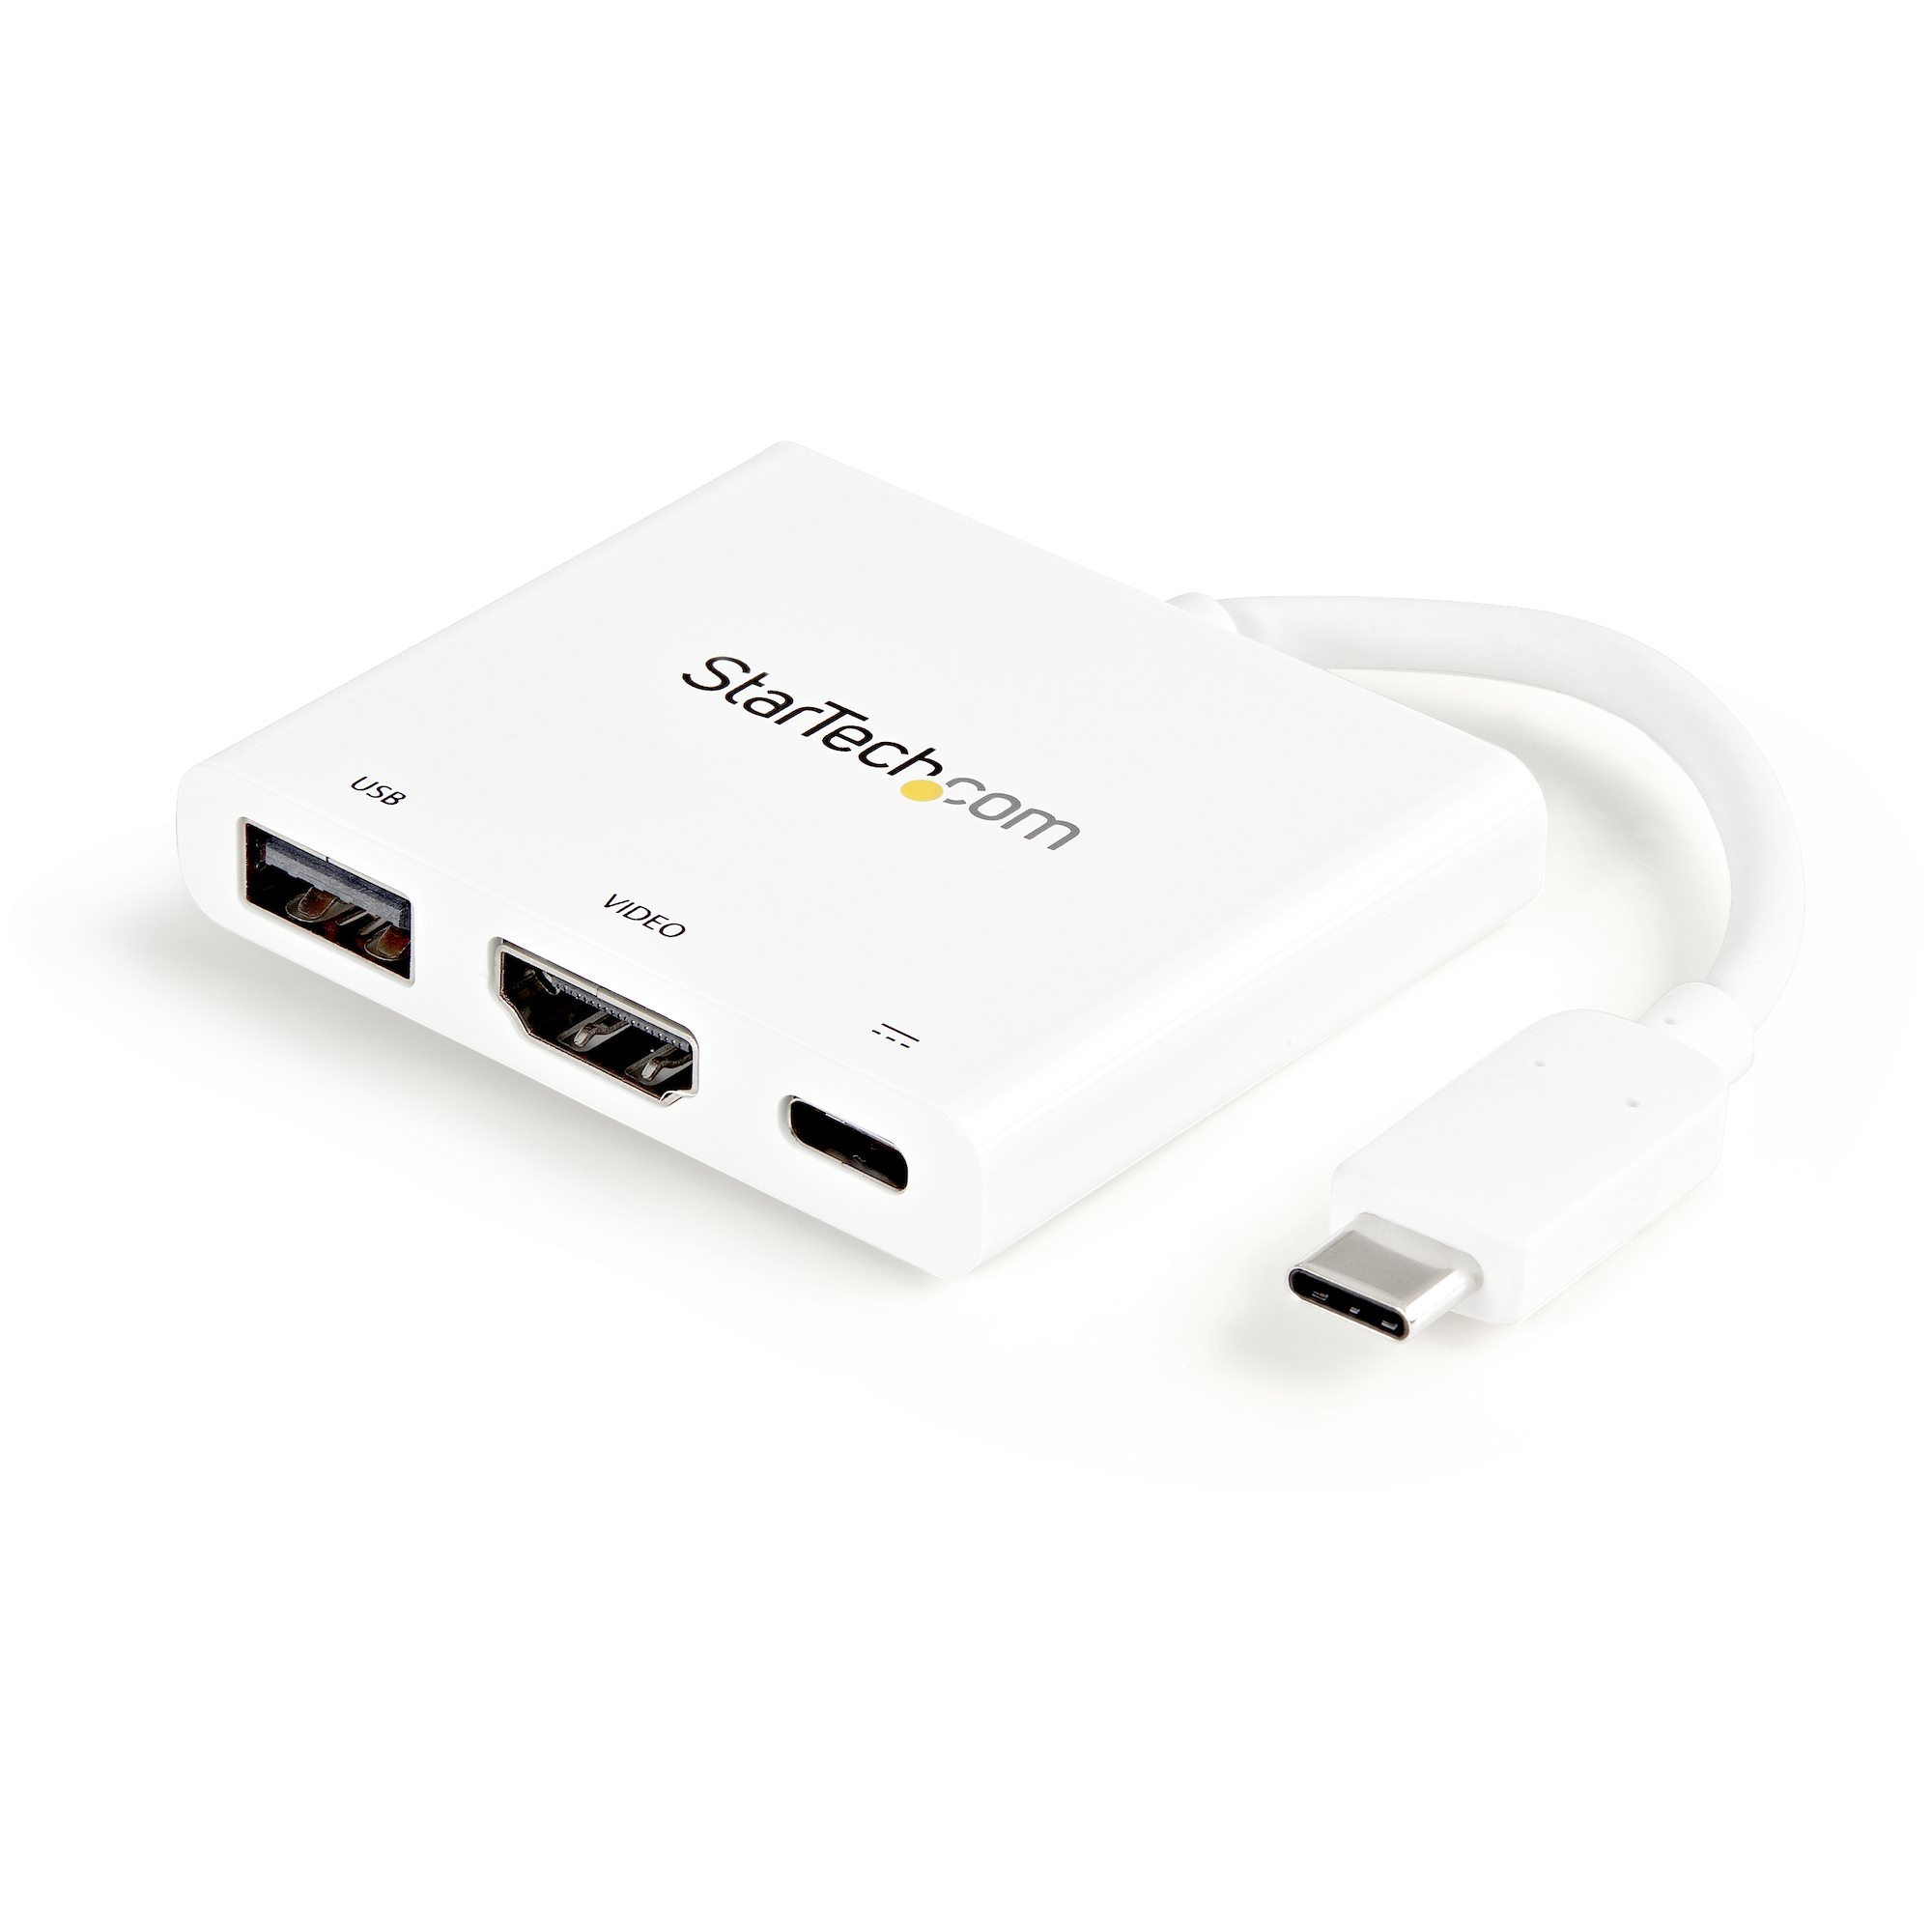 StarTech.com USB-C to HDMI Adapter - White - 4K 30Hz - Thunderbolt 3 Compatible - with Power Delivery (USB PD)